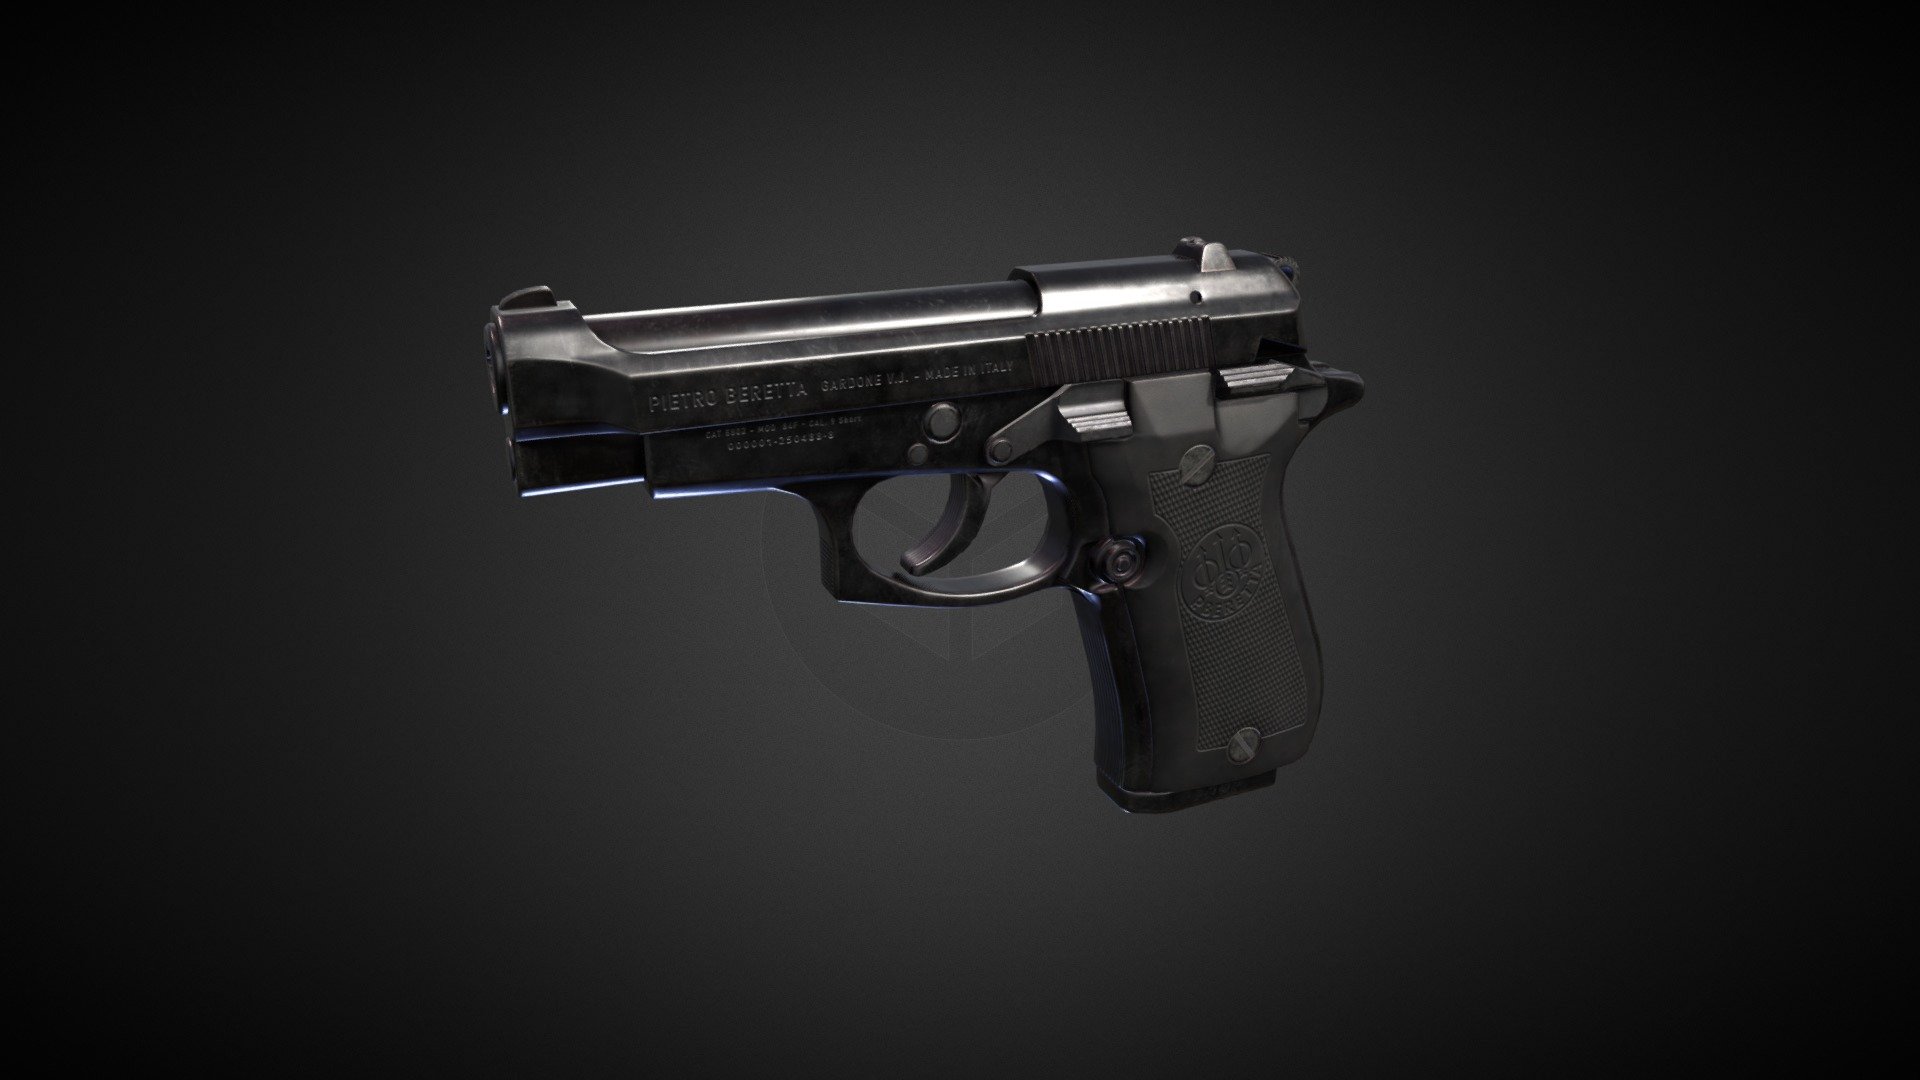 Classic compact pistol from Beretta in 9mm short.  

Model is rigged, it have two PBR materials in 4K. Black and Nickel plated colors available.

Tris:13K

Verts: 6K  

Made in Blender 3d model